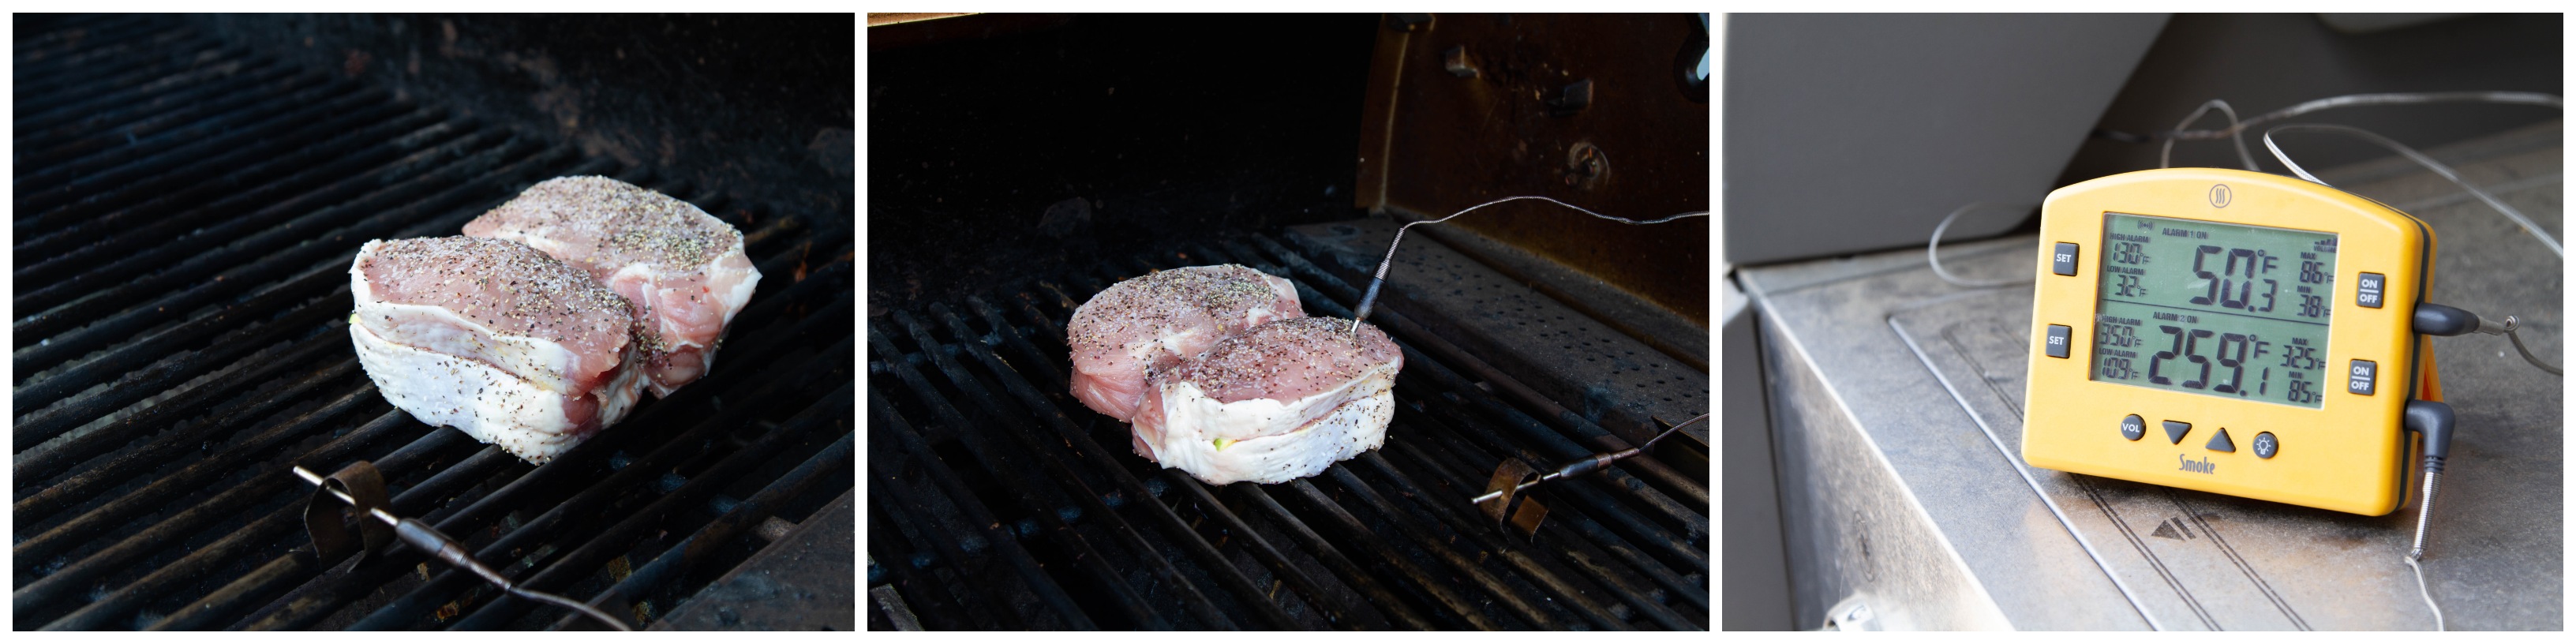 How To Grill Thick Cut Pork Chops Thermoworks,50 Anniversary Logo